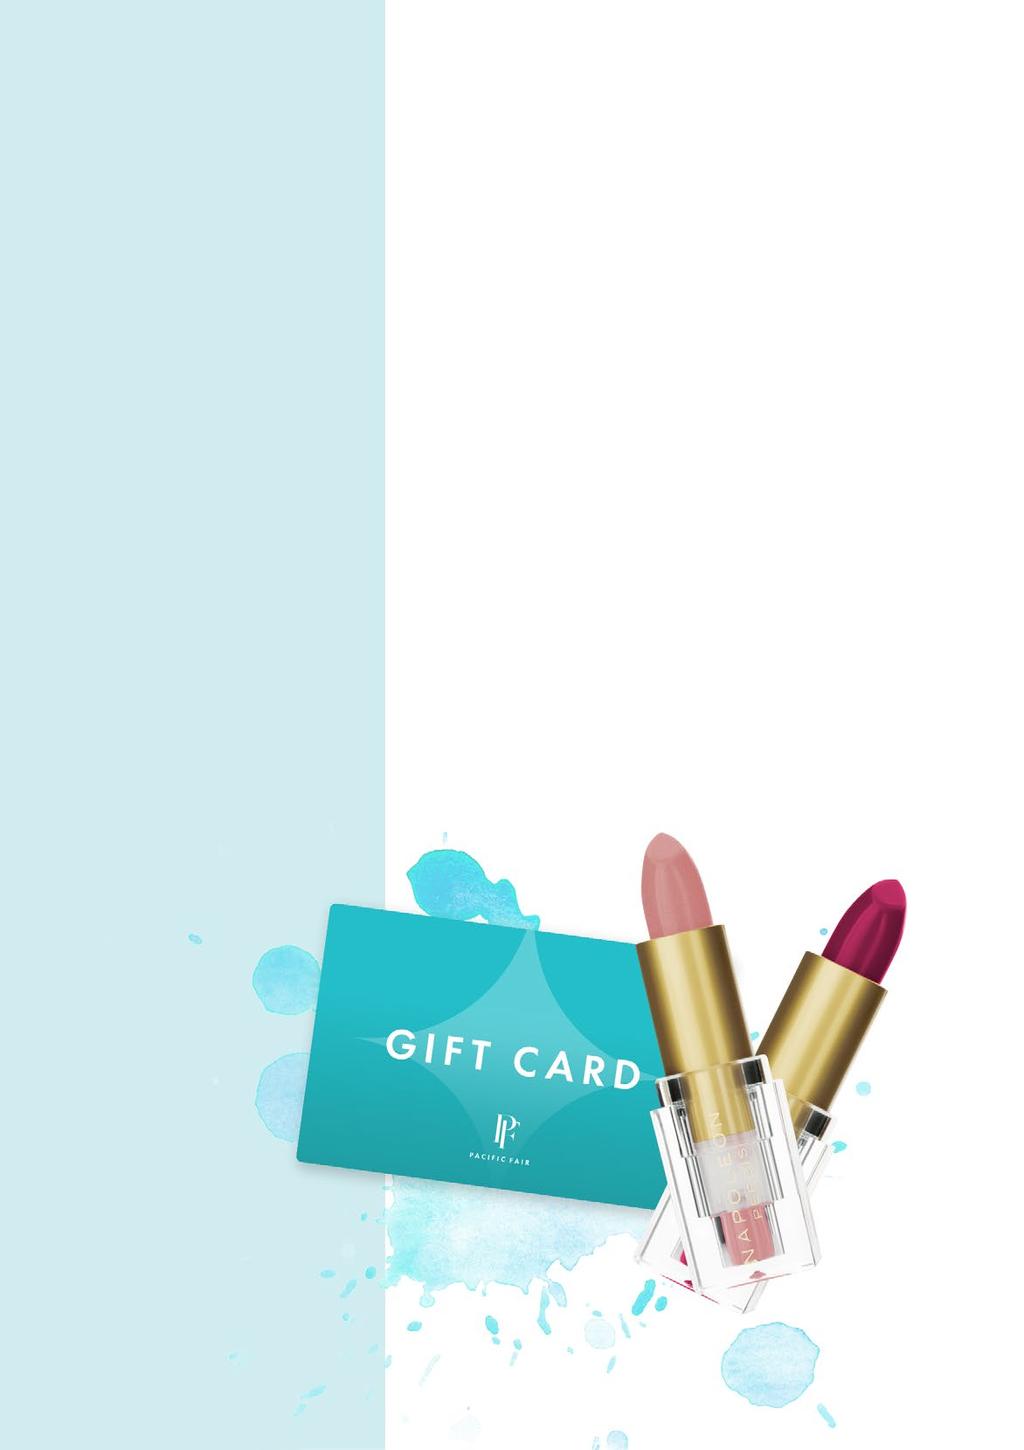 FREE $50 GIFT CARD & LIPSTICK WITH PURCHASE * Receive a $50 Pacific Fair gift card and a Napoleon Perdis DéVine Goddess Lipstick in Athena